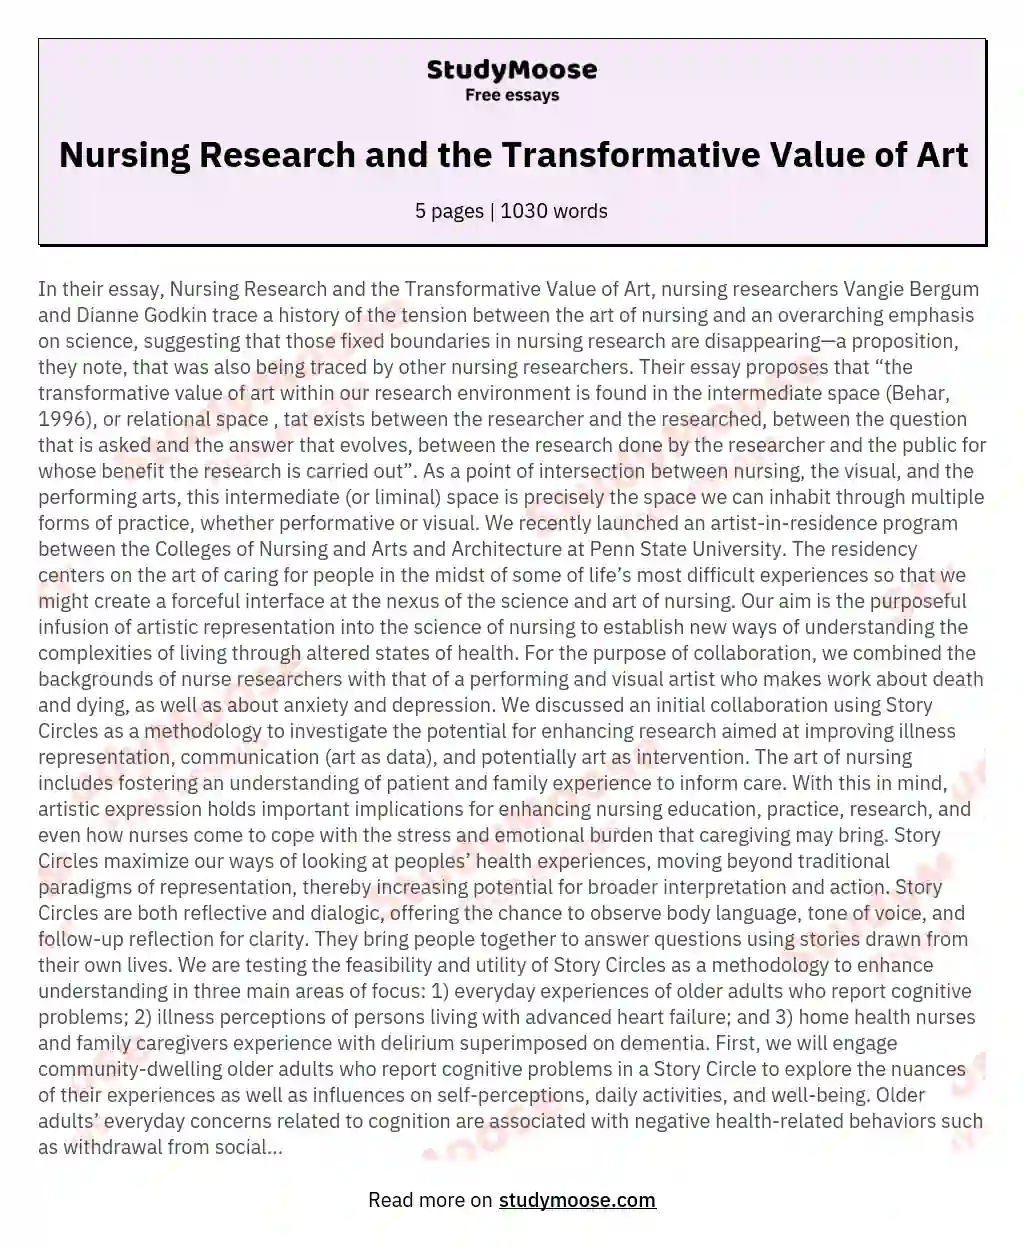 Nursing Research and the Transformative Value of Art essay